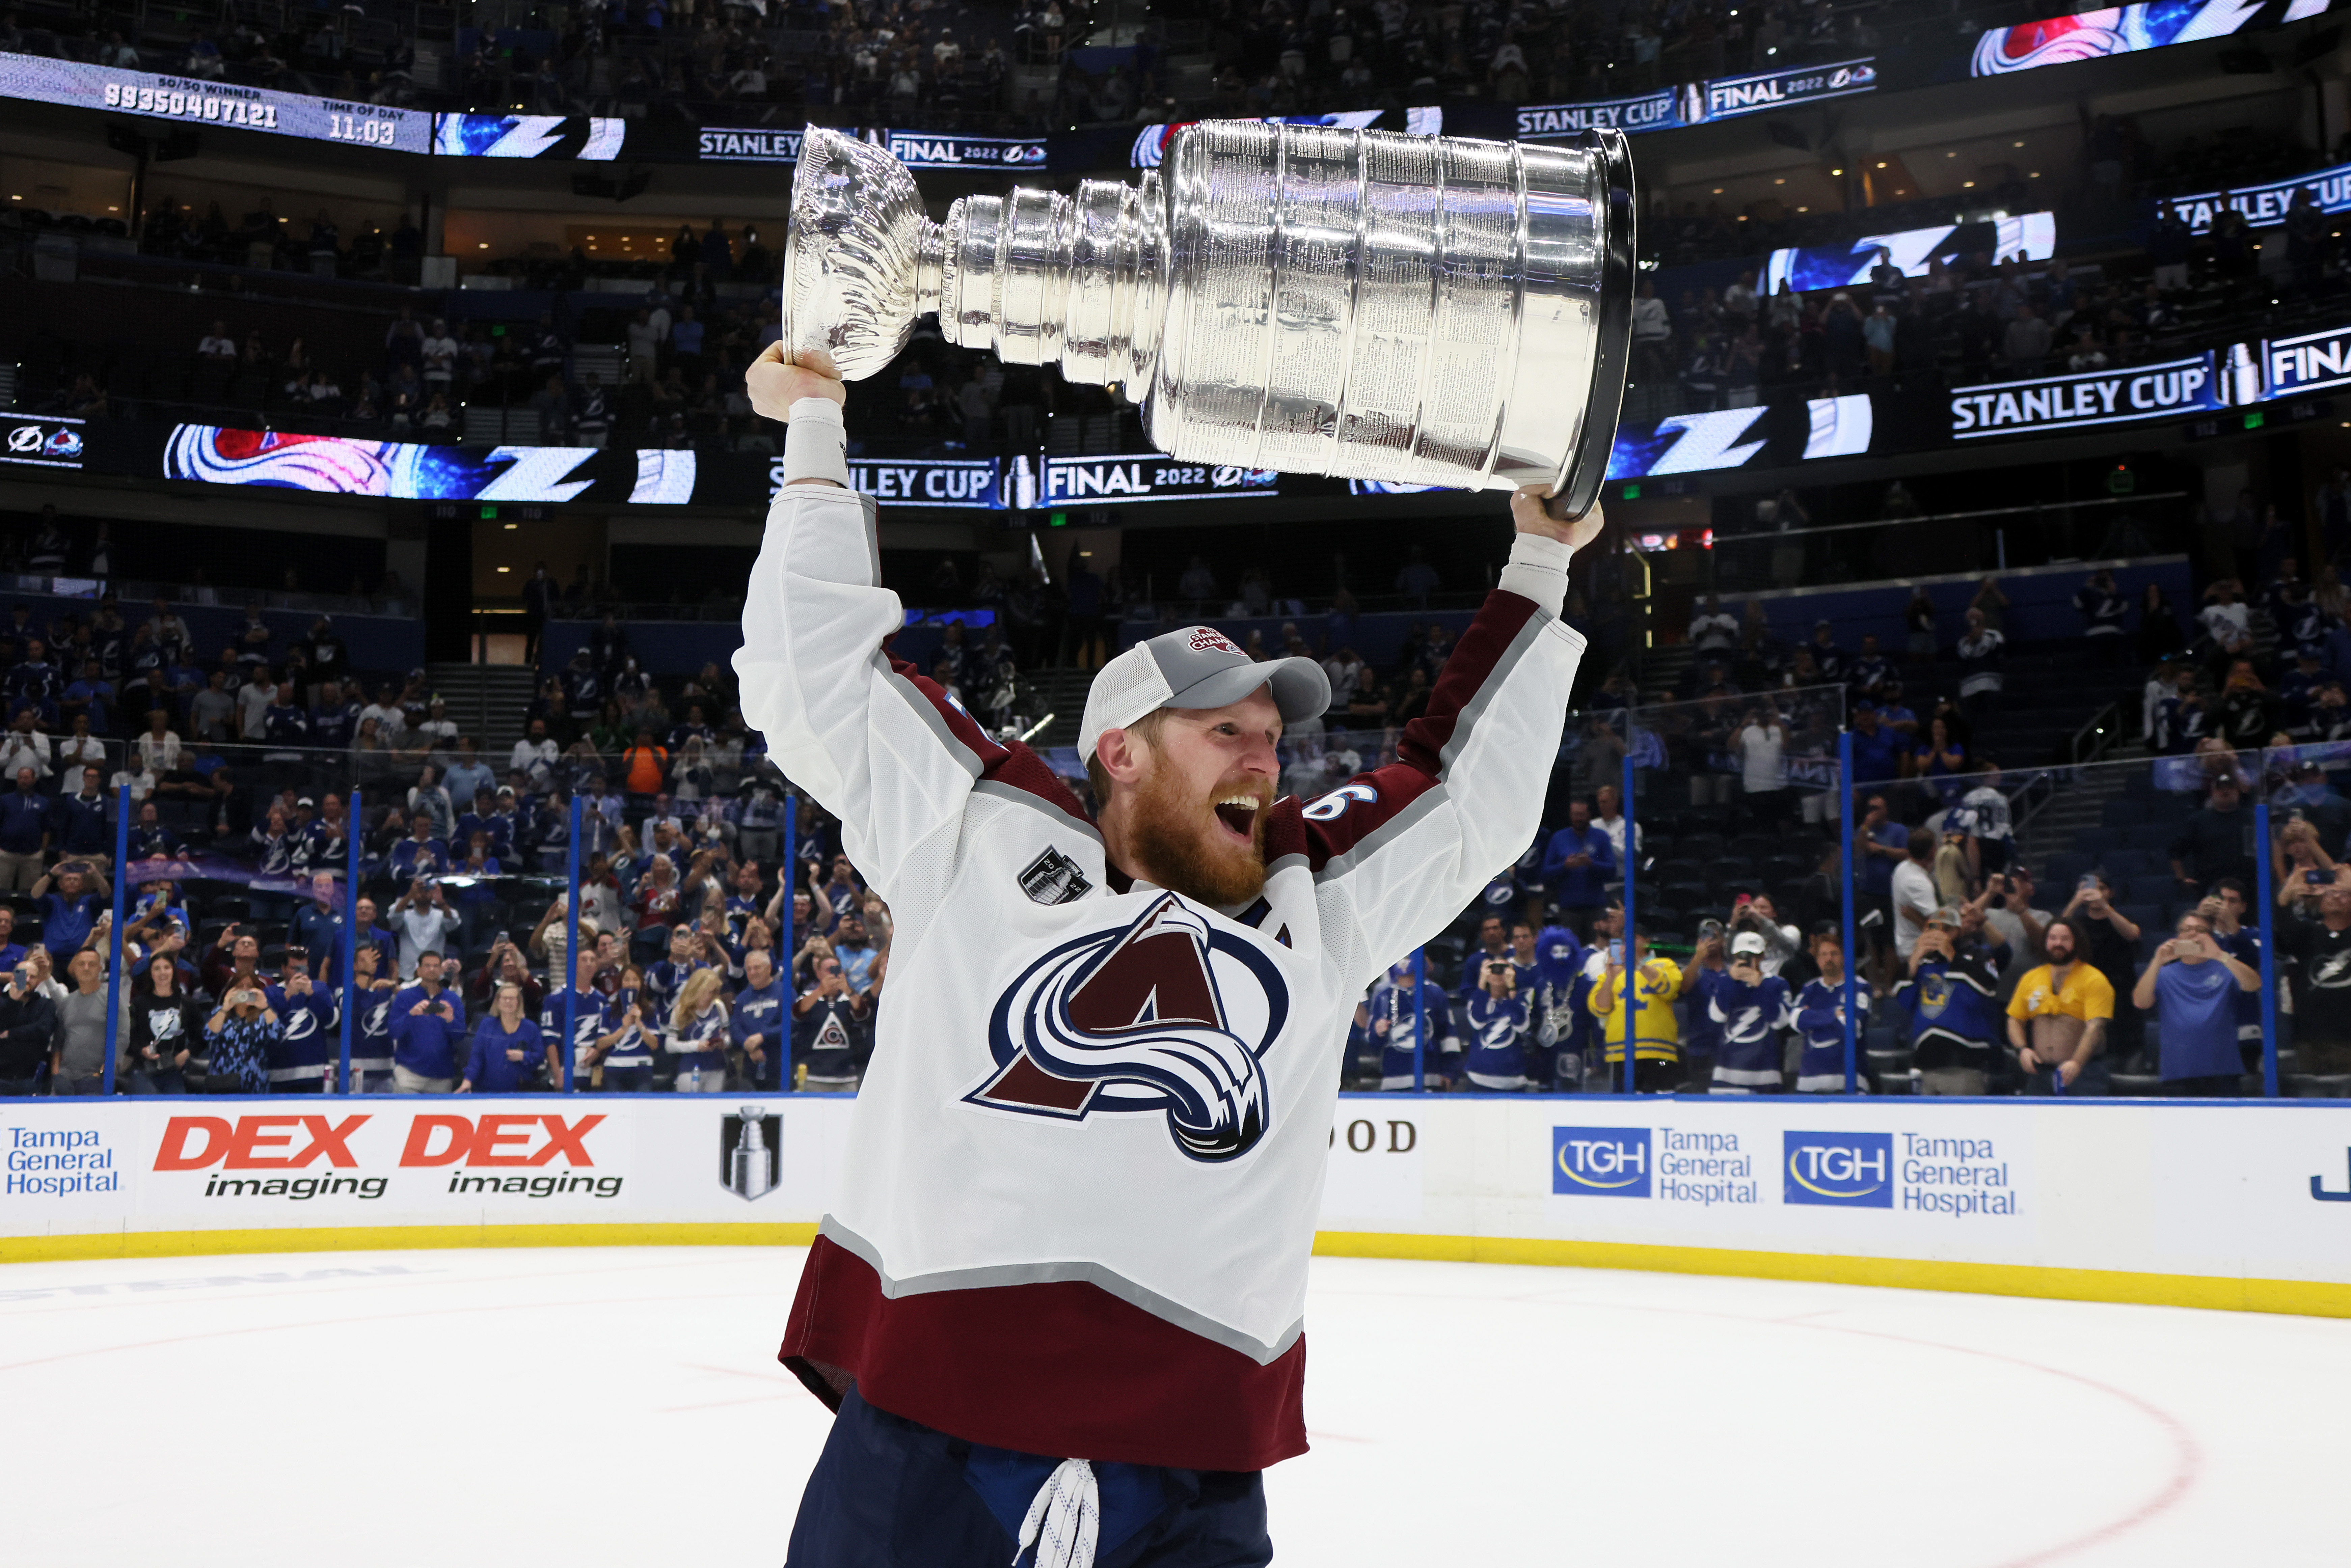 Avalanche have high expectations in Stanley Cup Final